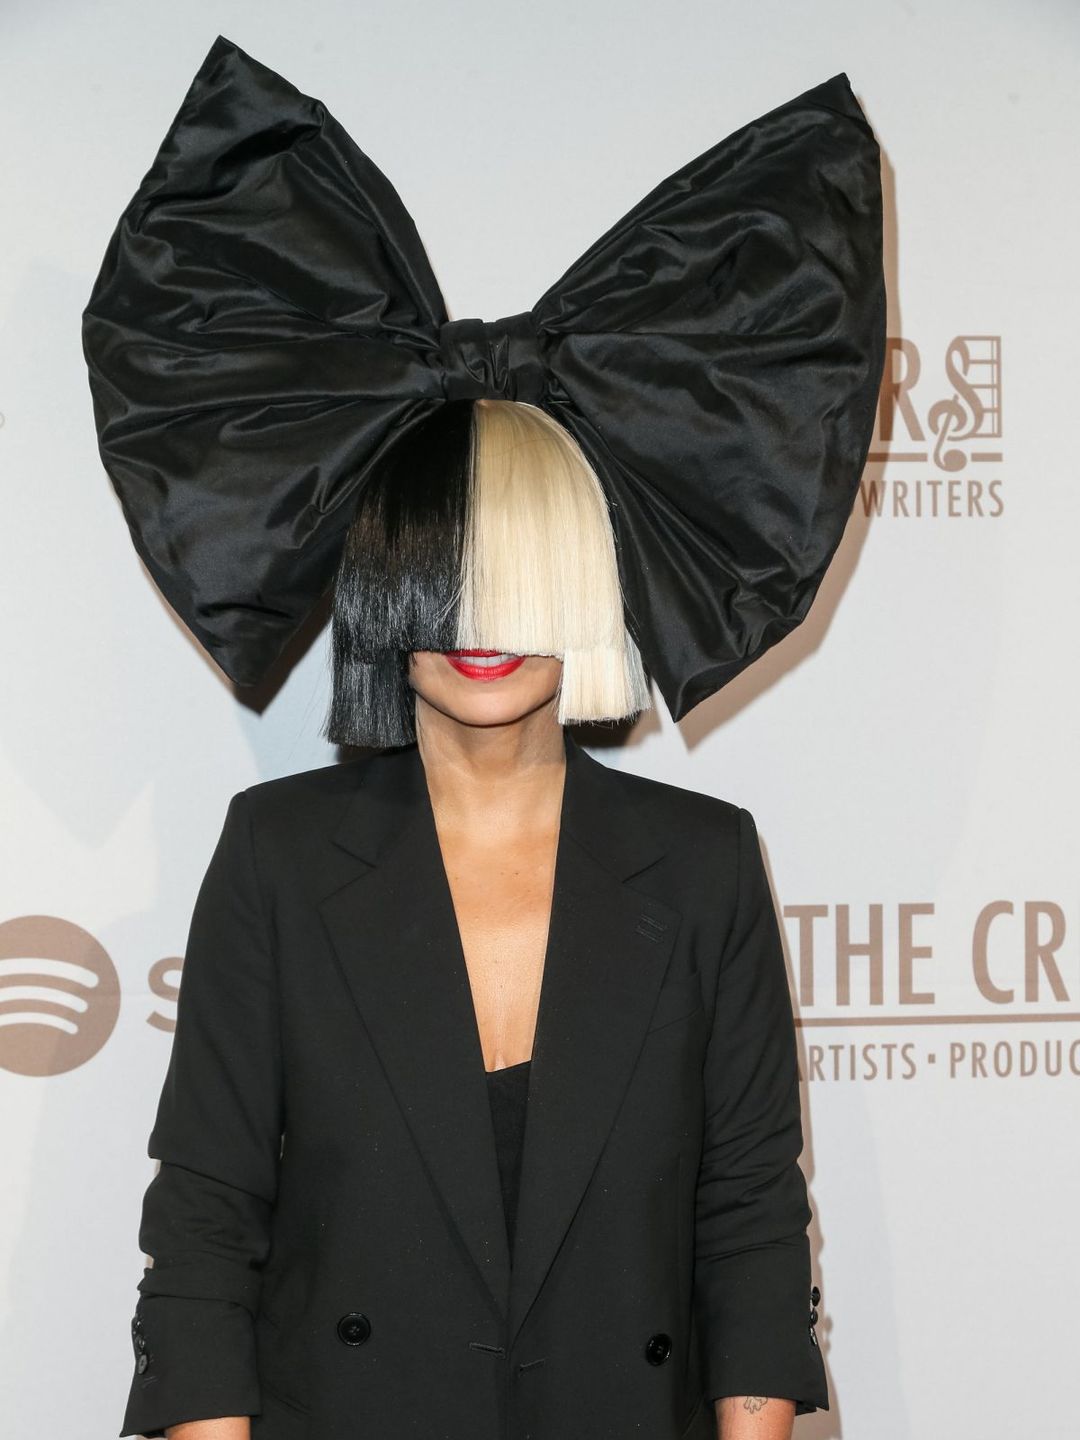 Sia unphotoshopped pictures